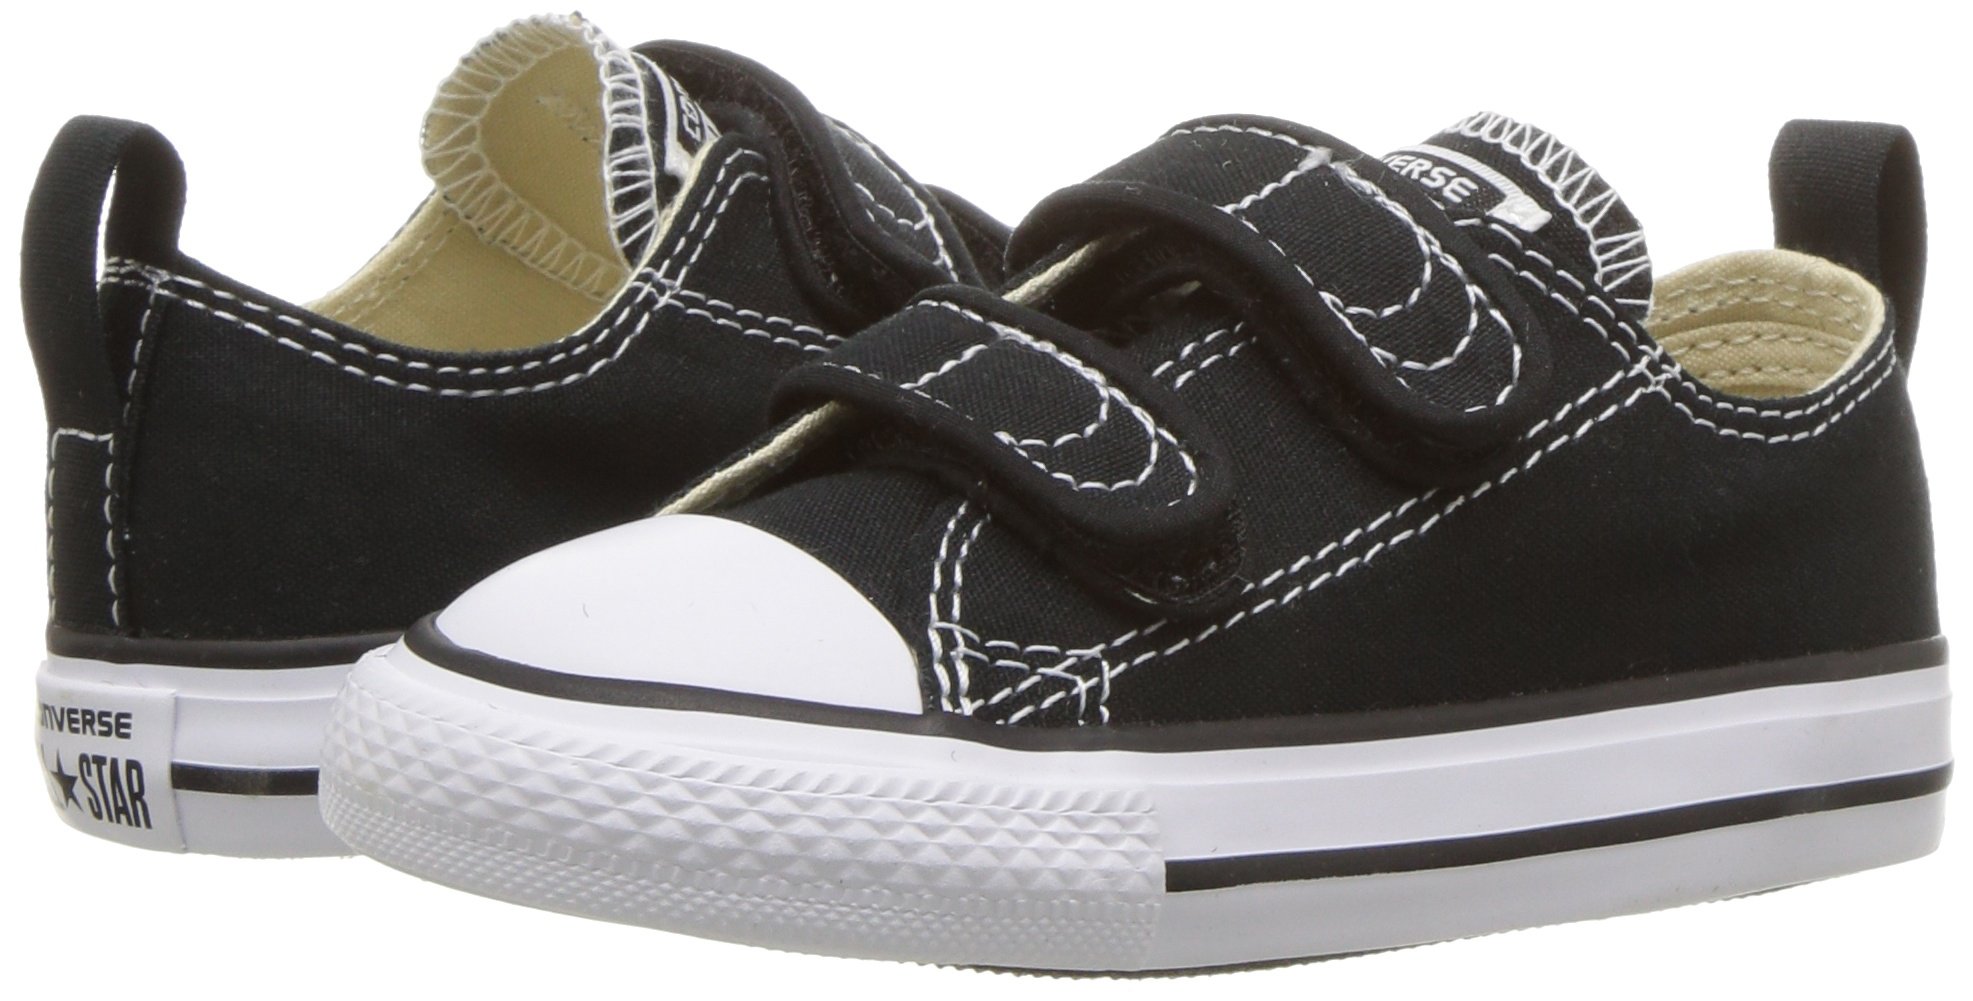 Converse Unisex-Child Chuck Taylor All Star 2v Low Top Sneaker